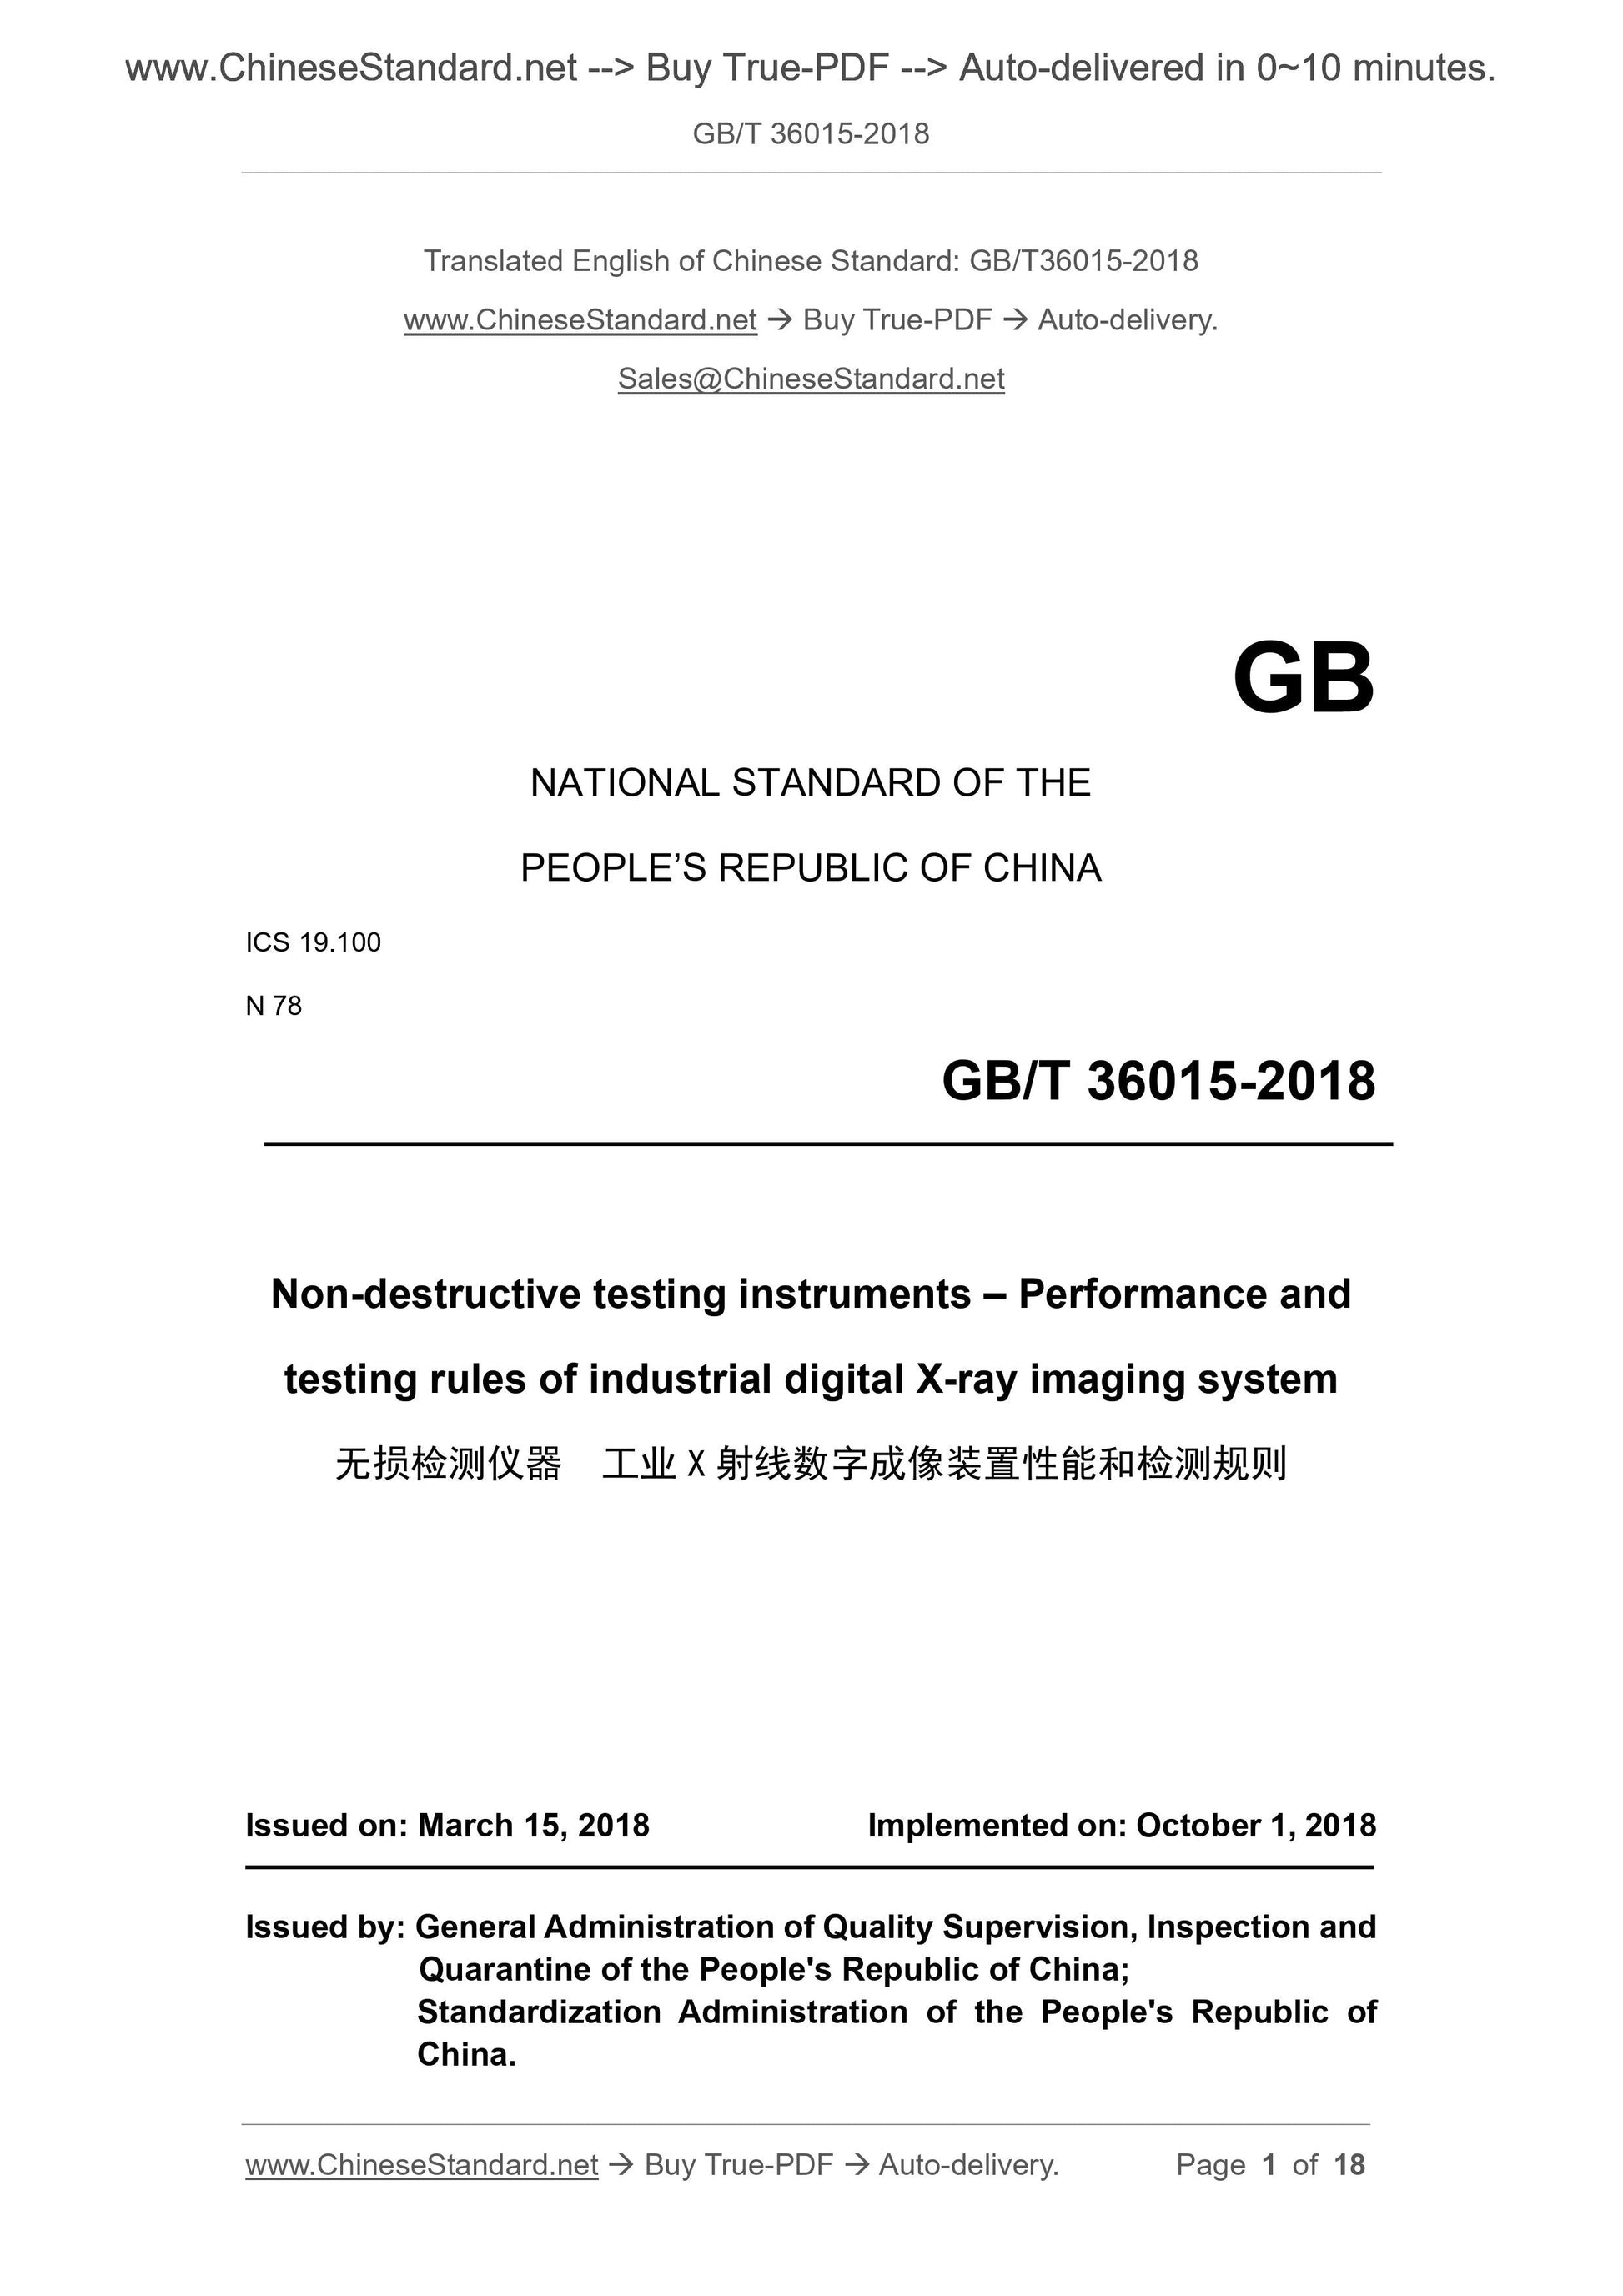 GB/T 36015-2018 Page 1